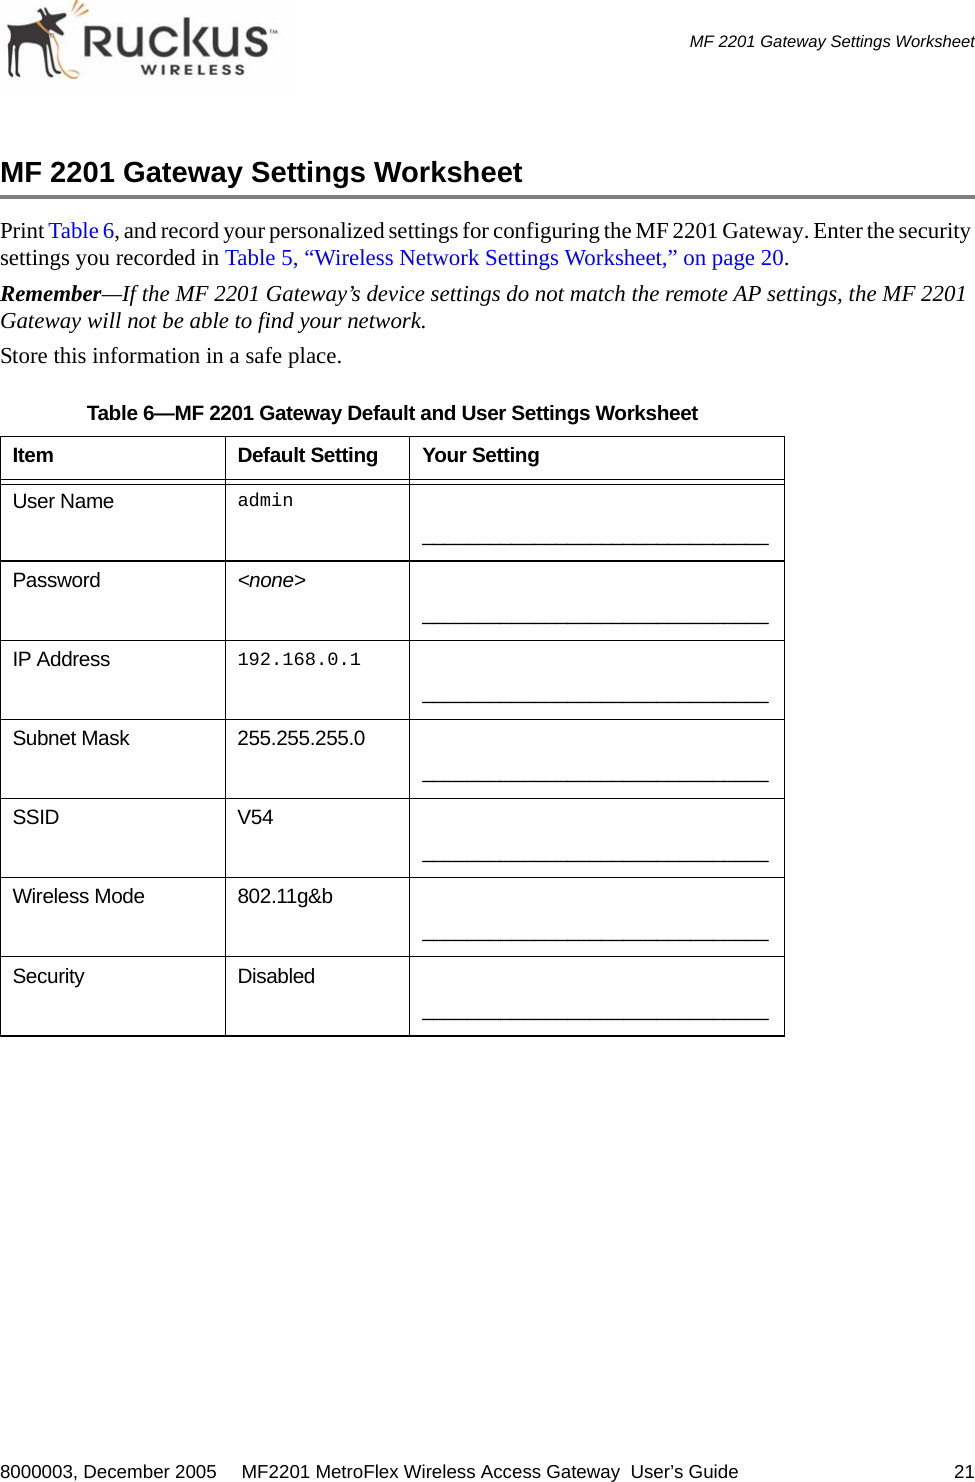 8000003, December 2005  MF2201 MetroFlex Wireless Access Gateway  User’s Guide 21MF 2201 Gateway Settings WorksheetMF 2201 Gateway Settings WorksheetPrint Table 6, and record your personalized settings for configuring the MF 2201 Gateway. Enter the security settings you recorded in Table 5, “Wireless Network Settings Worksheet,” on page 20. Remember—If the MF 2201 Gateway’s device settings do not match the remote AP settings, the MF 2201 Gateway will not be able to find your network.Store this information in a safe place.Table 6—MF 2201 Gateway Default and User Settings WorksheetItem Default Setting Your SettingUser Name admin_______________________________Password &lt;none&gt;_______________________________IP Address 192.168.0.1_______________________________Subnet Mask 255.255.255.0_______________________________SSID V54_______________________________Wireless Mode 802.11g&amp;b_______________________________Security Disabled_______________________________